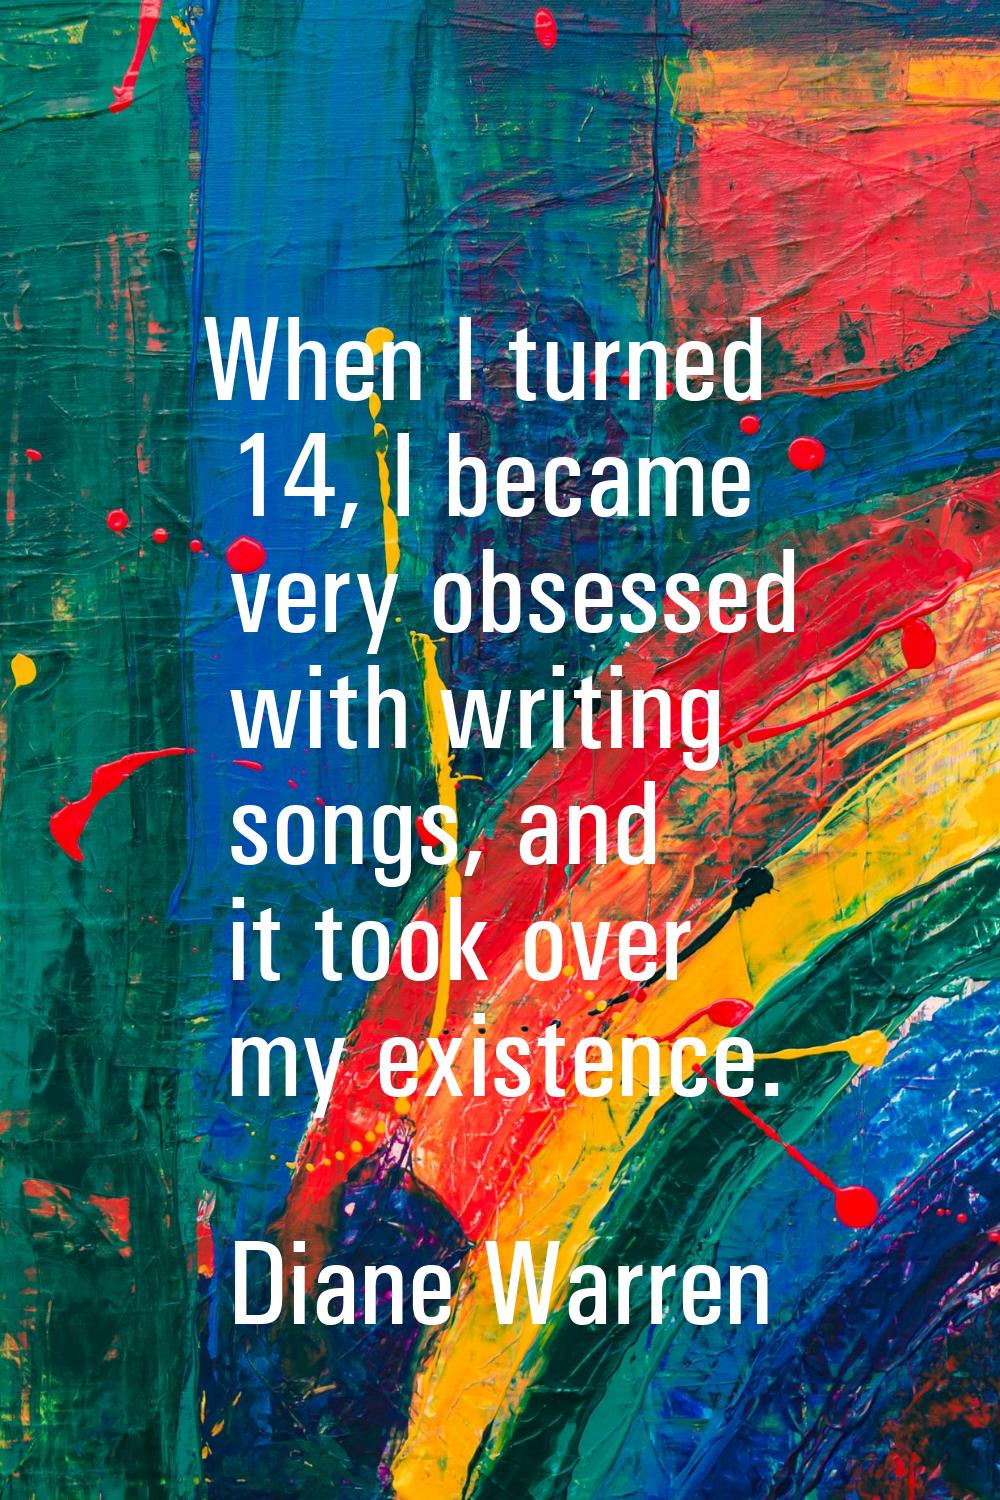 When I turned 14, I became very obsessed with writing songs, and it took over my existence.